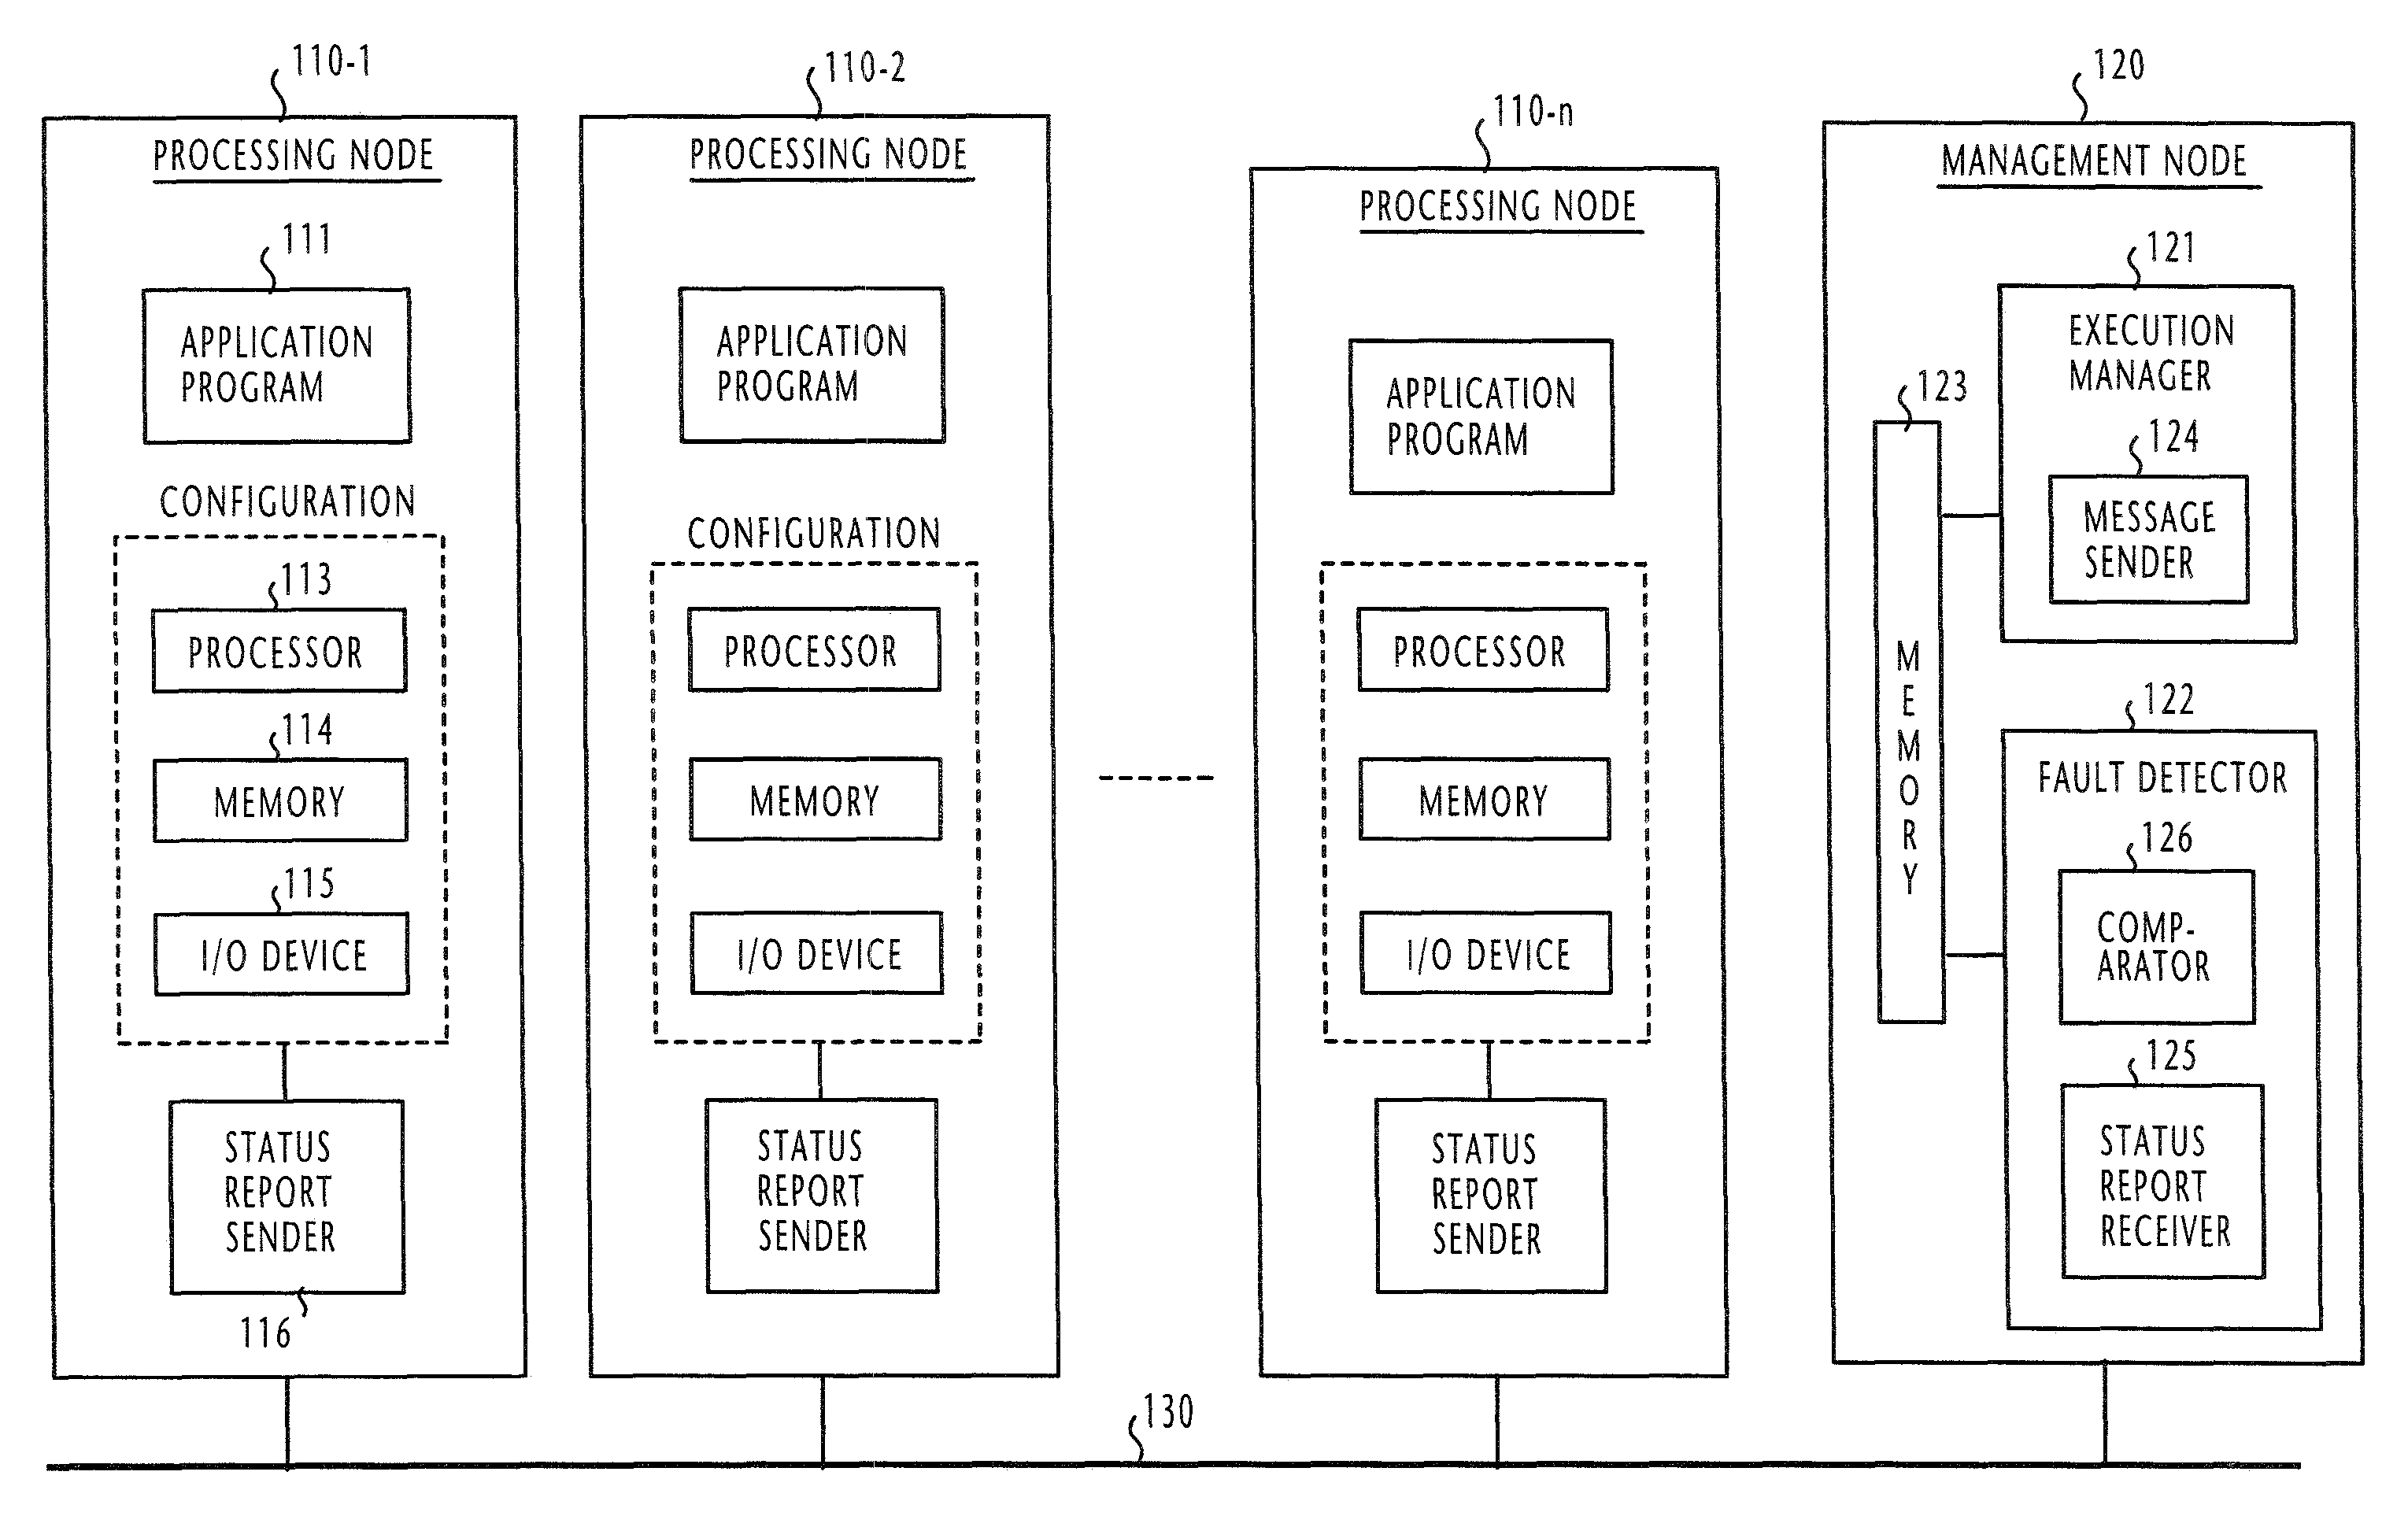 Fault tolerant multi-node computing system using periodically fetched configuration status data to detect an abnormal node